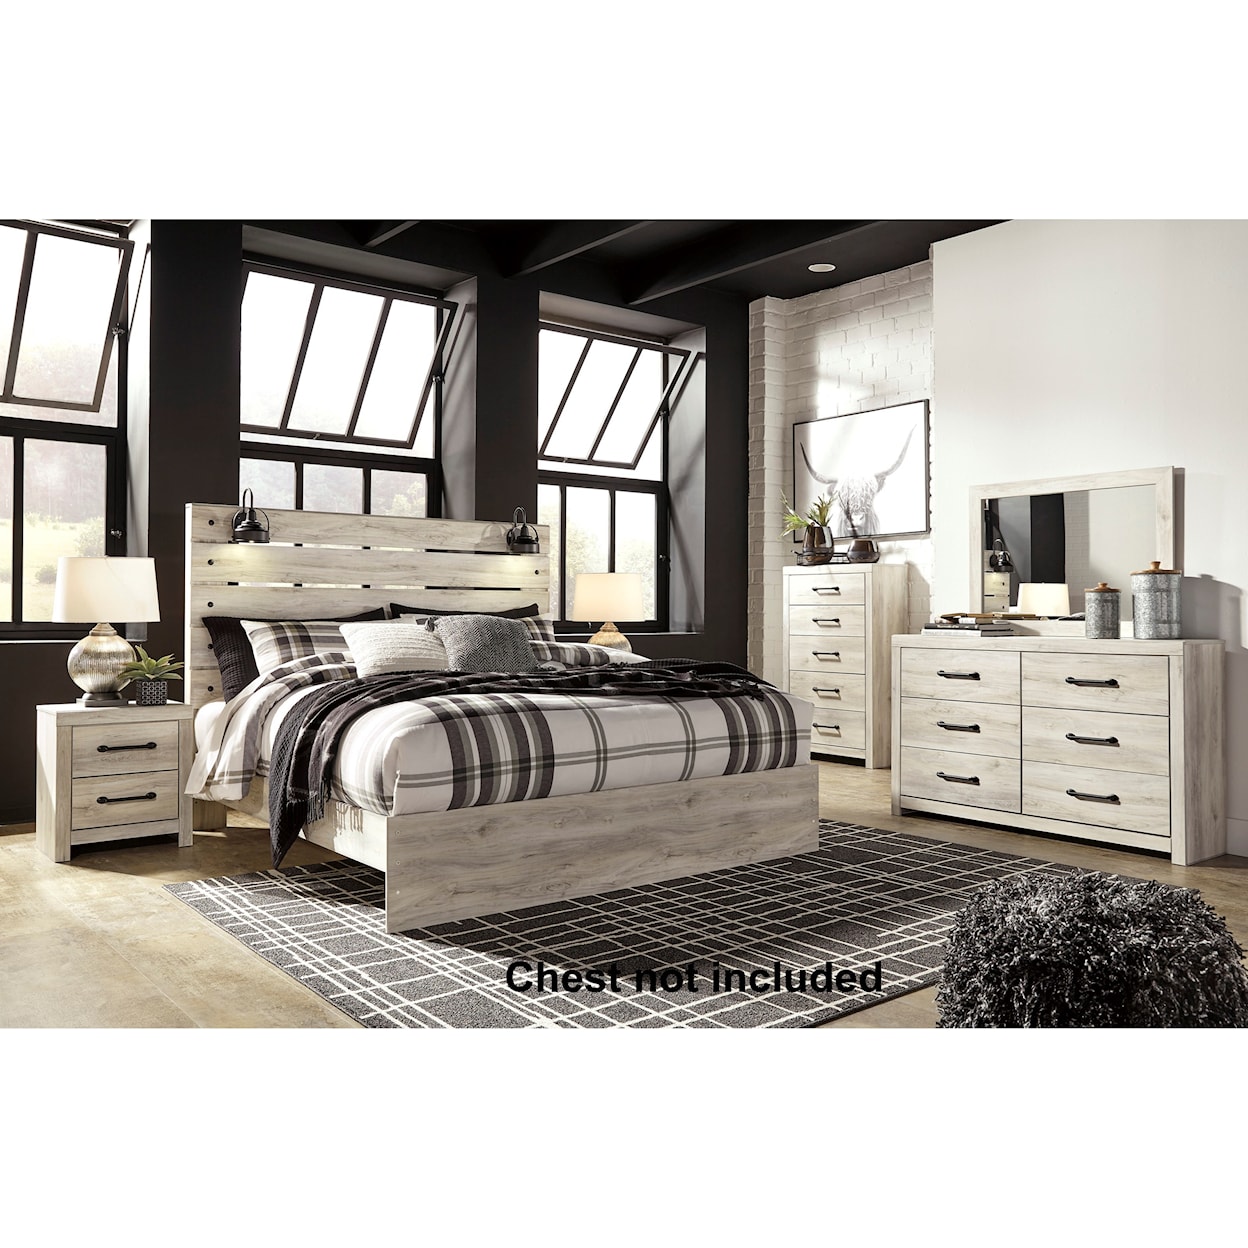 Signature Design Cambeck King Bedroom Group